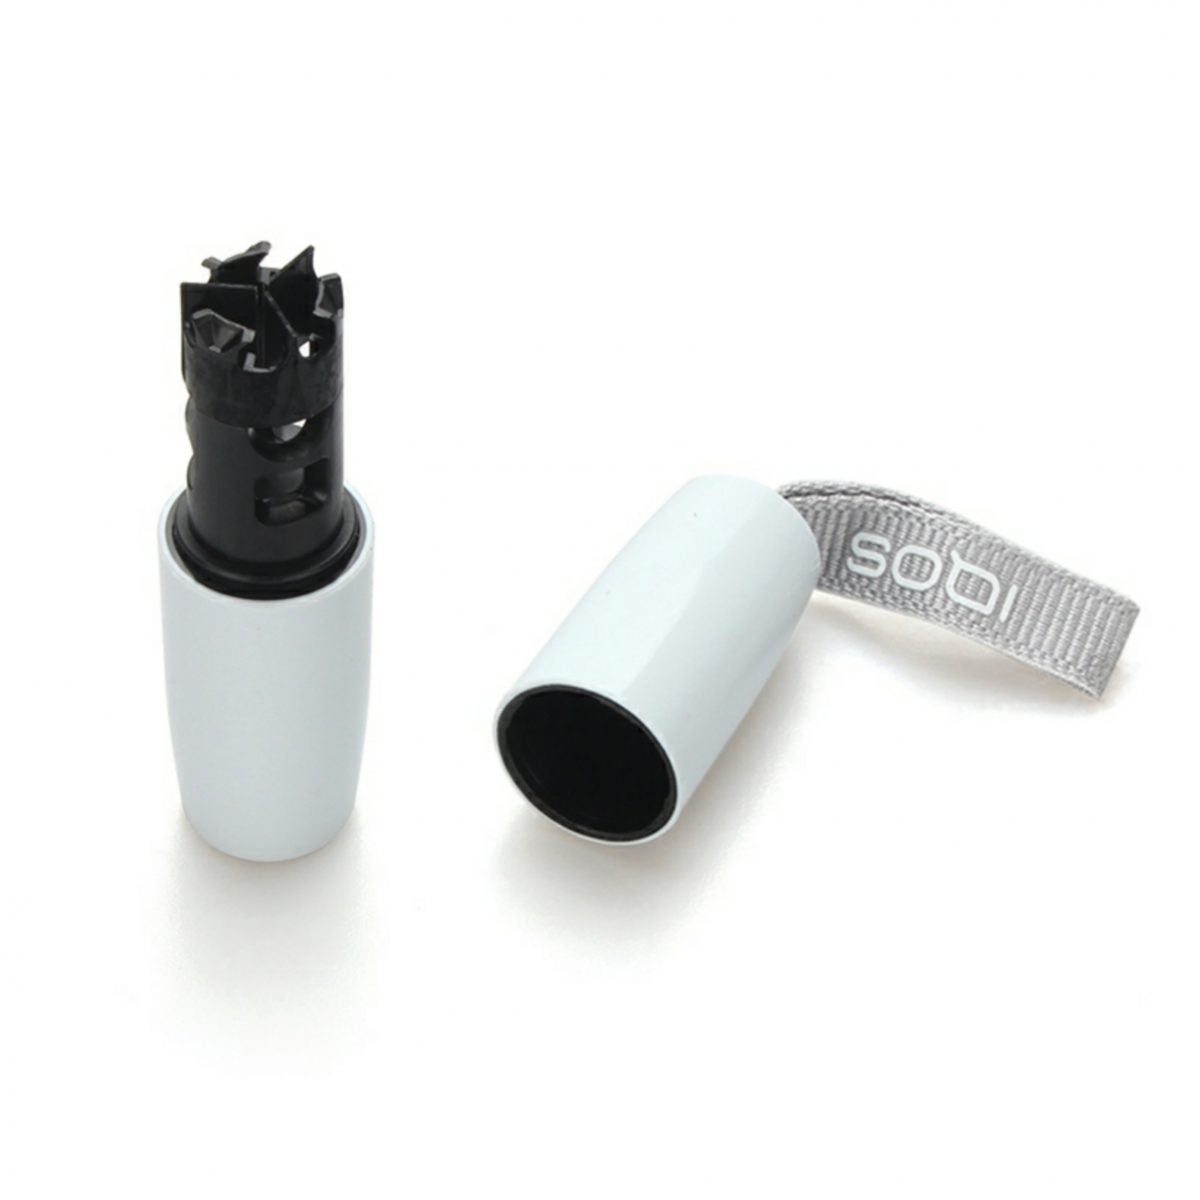 Original IQOS Cleaning tool- IQOS 3 and 3M